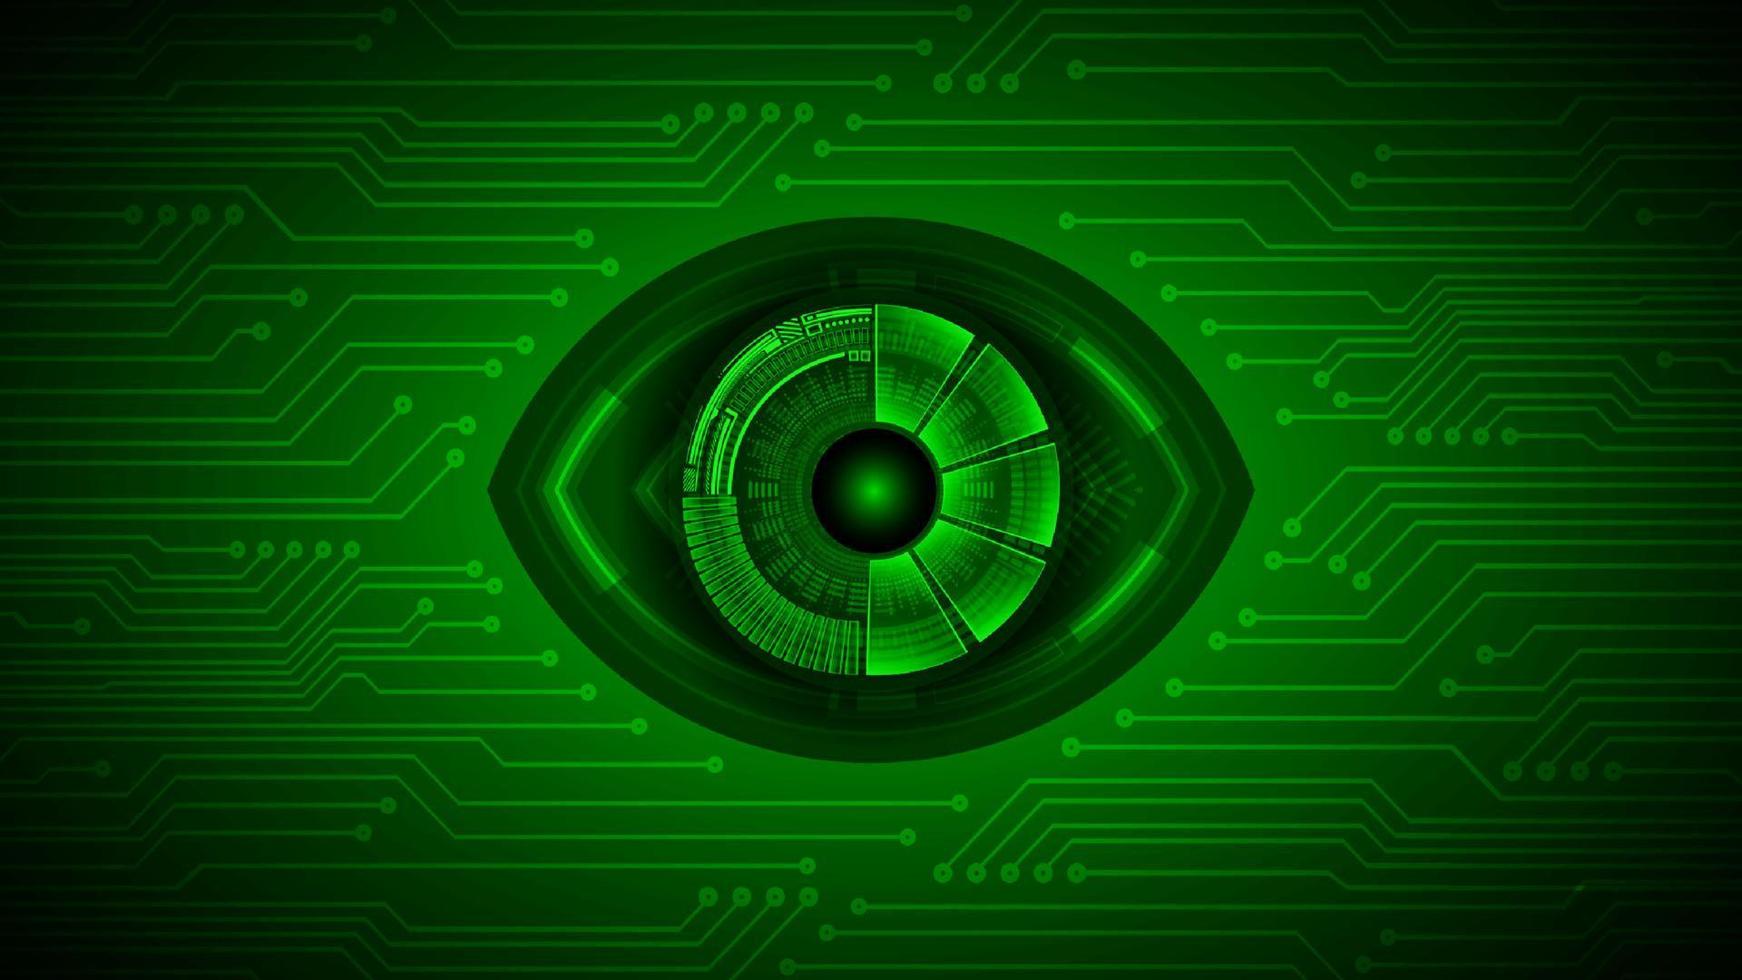 Cybersecurity Technology Background with Eye vector